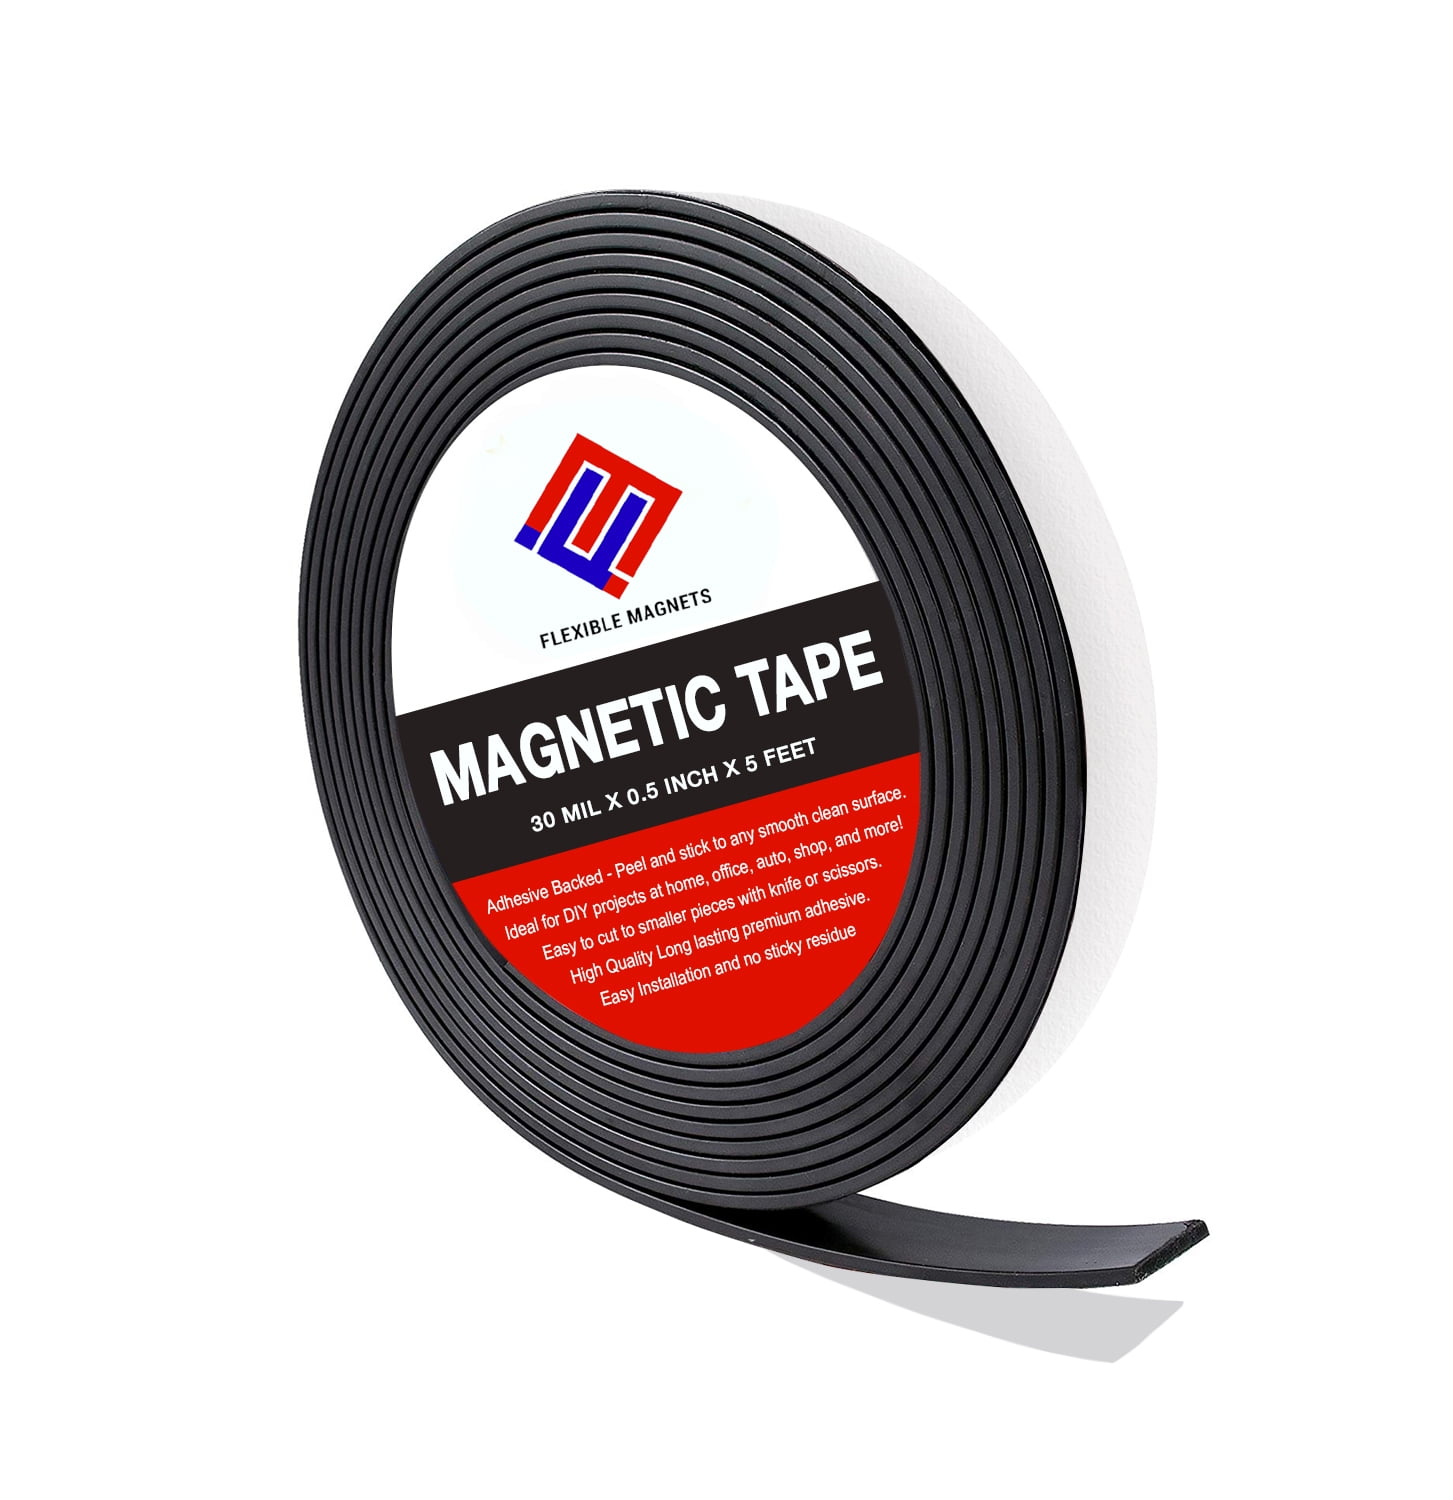 Flexible Magnetic Square Tape 60 PCS Square Small Magnetic Strips with Adhesive Backing Peel & Stick Magnets Stickers for Crafts Office DIY Projects